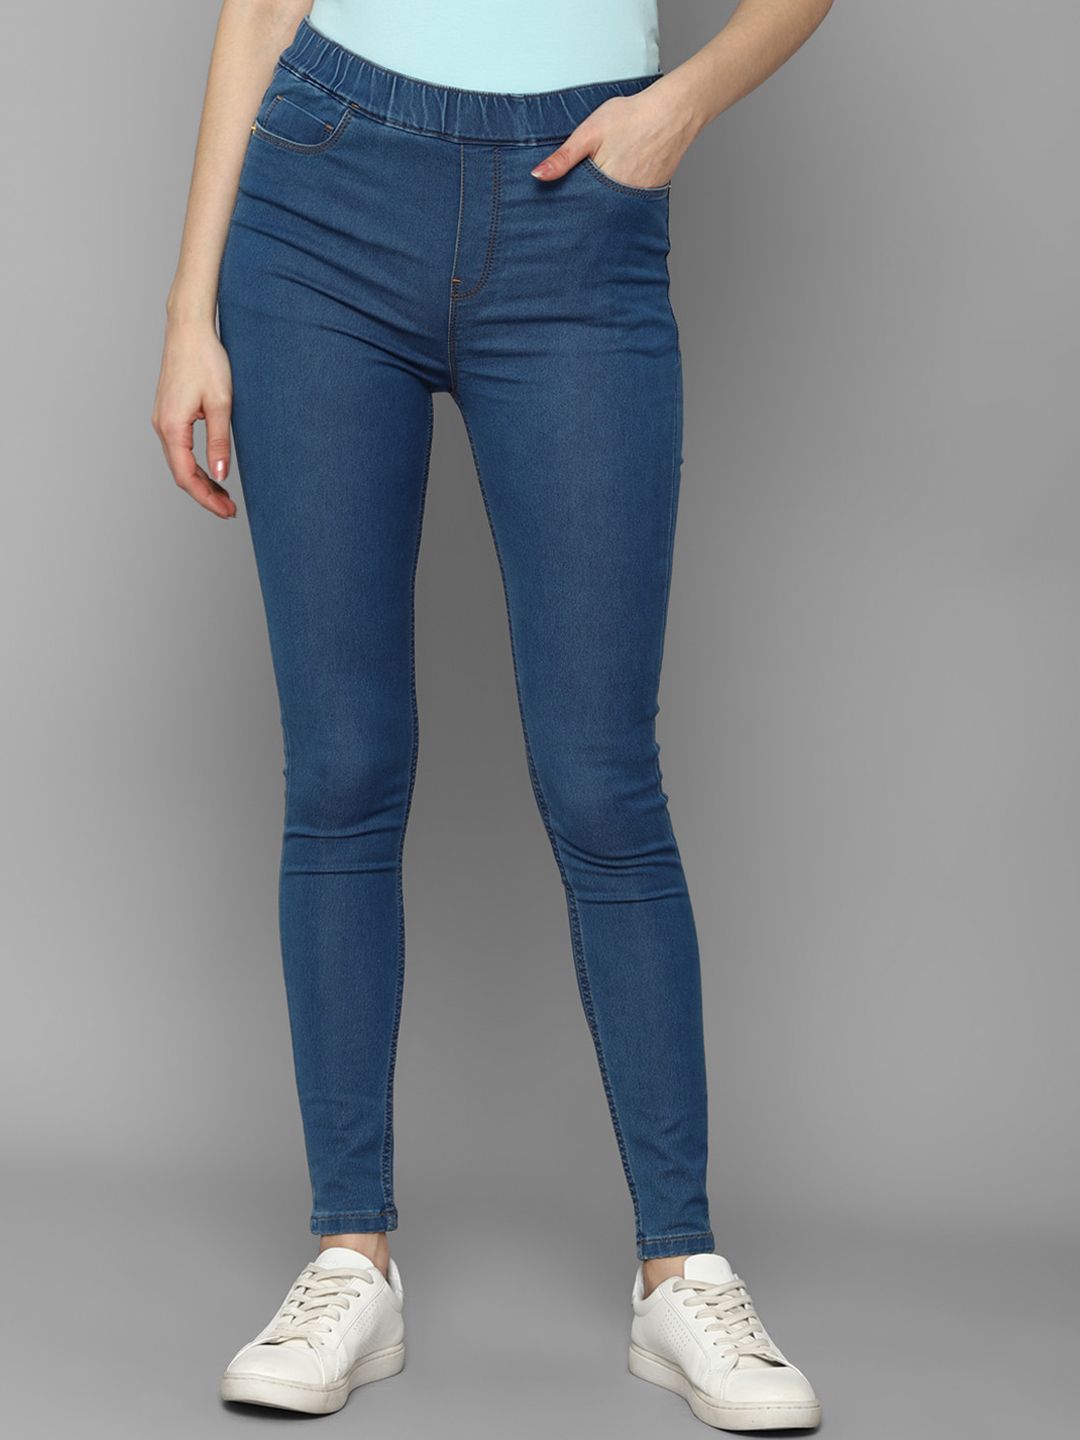 Allen Solly Woman Women Navy Blue Slim Fit Jeans Price in India